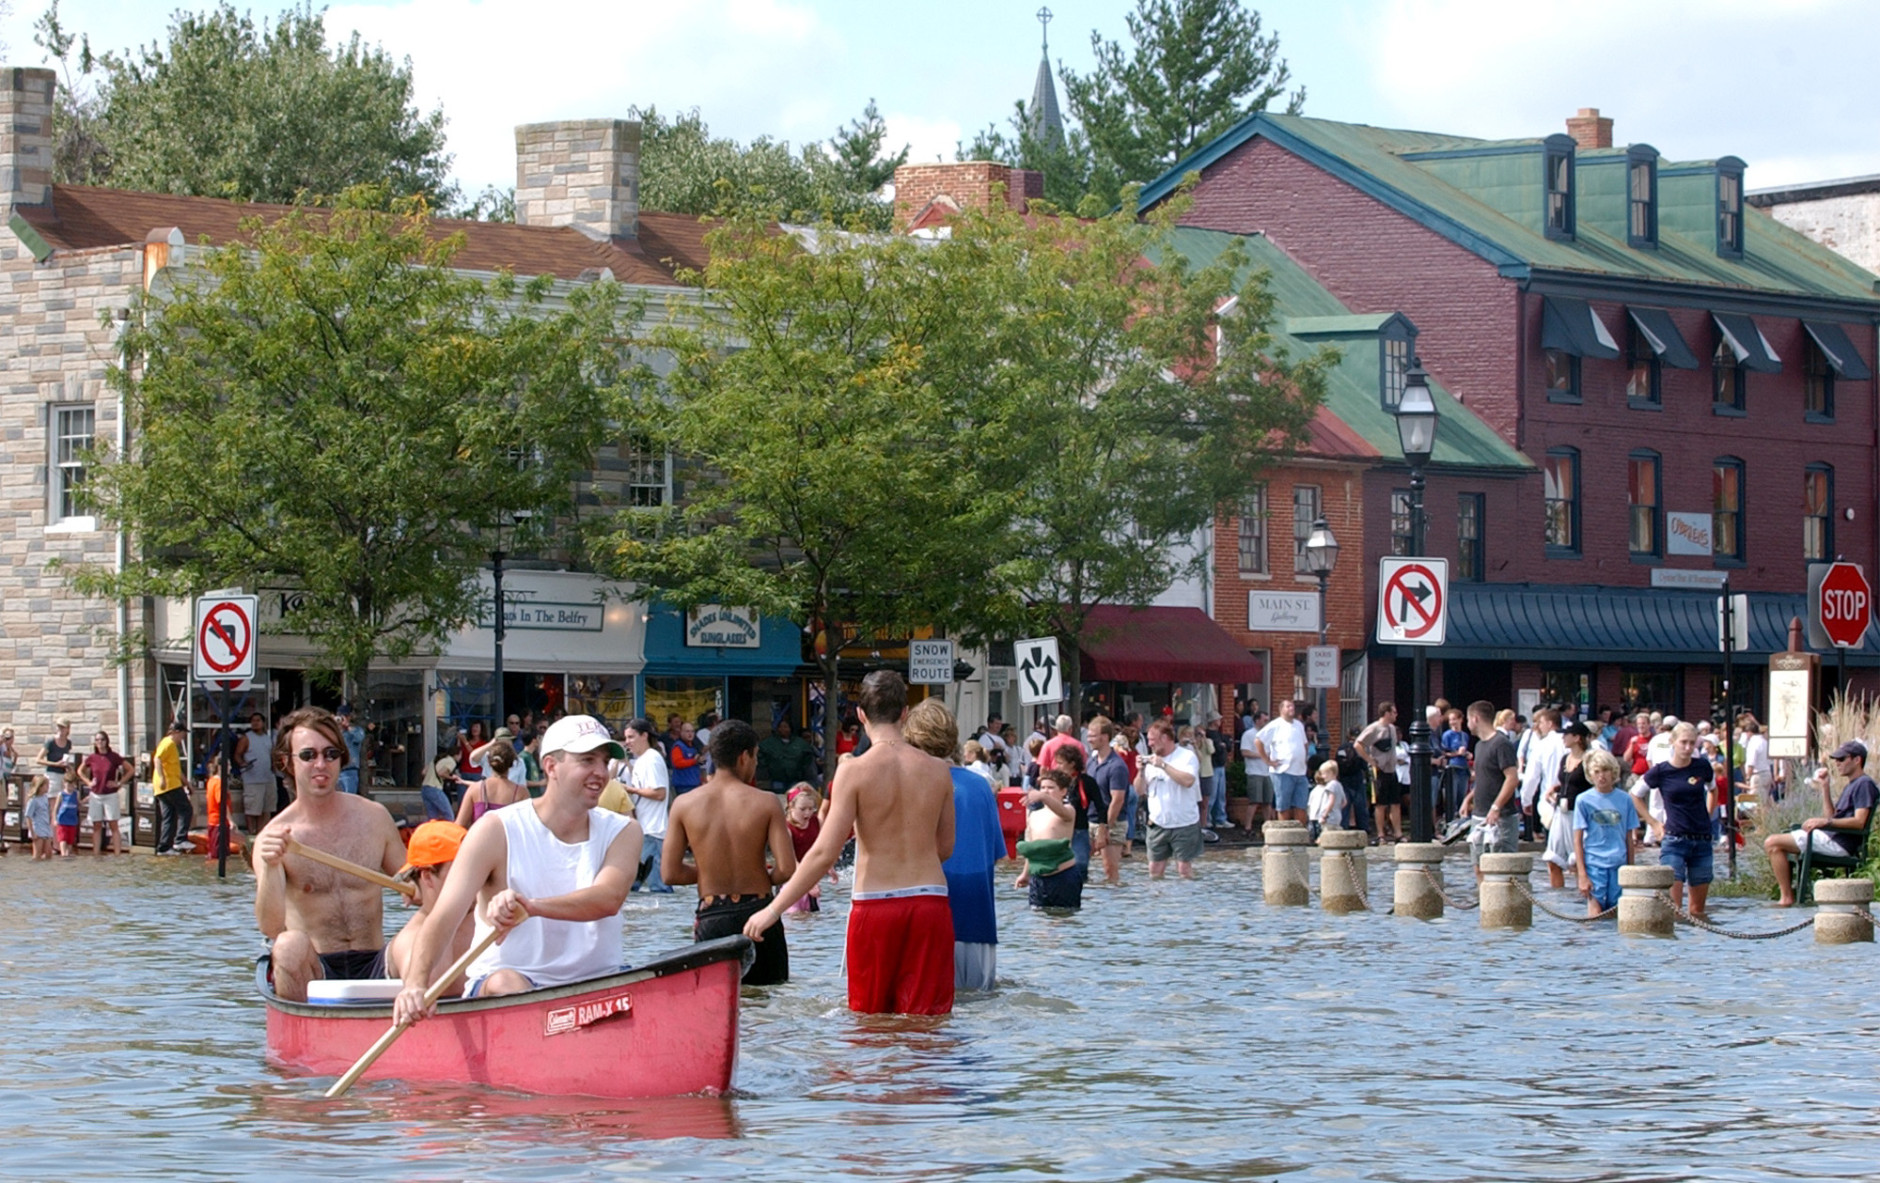 Dozens of people gather in flooded downtown Annapolis, Md., Friday, Sept. 19, 2003, to see the water damage from Hurricane Isabel. Rising tides fed by high winds and rains from Isabel pushed water inland to low-lying areas around the Chesapeake Bay and Potomac River early Friday, flooding homes and businesses. Tidal surges up to 7 feet were expected in some areas of southern Maryland, where high tides began late in the night.(AP Photo/Susan Walsh)